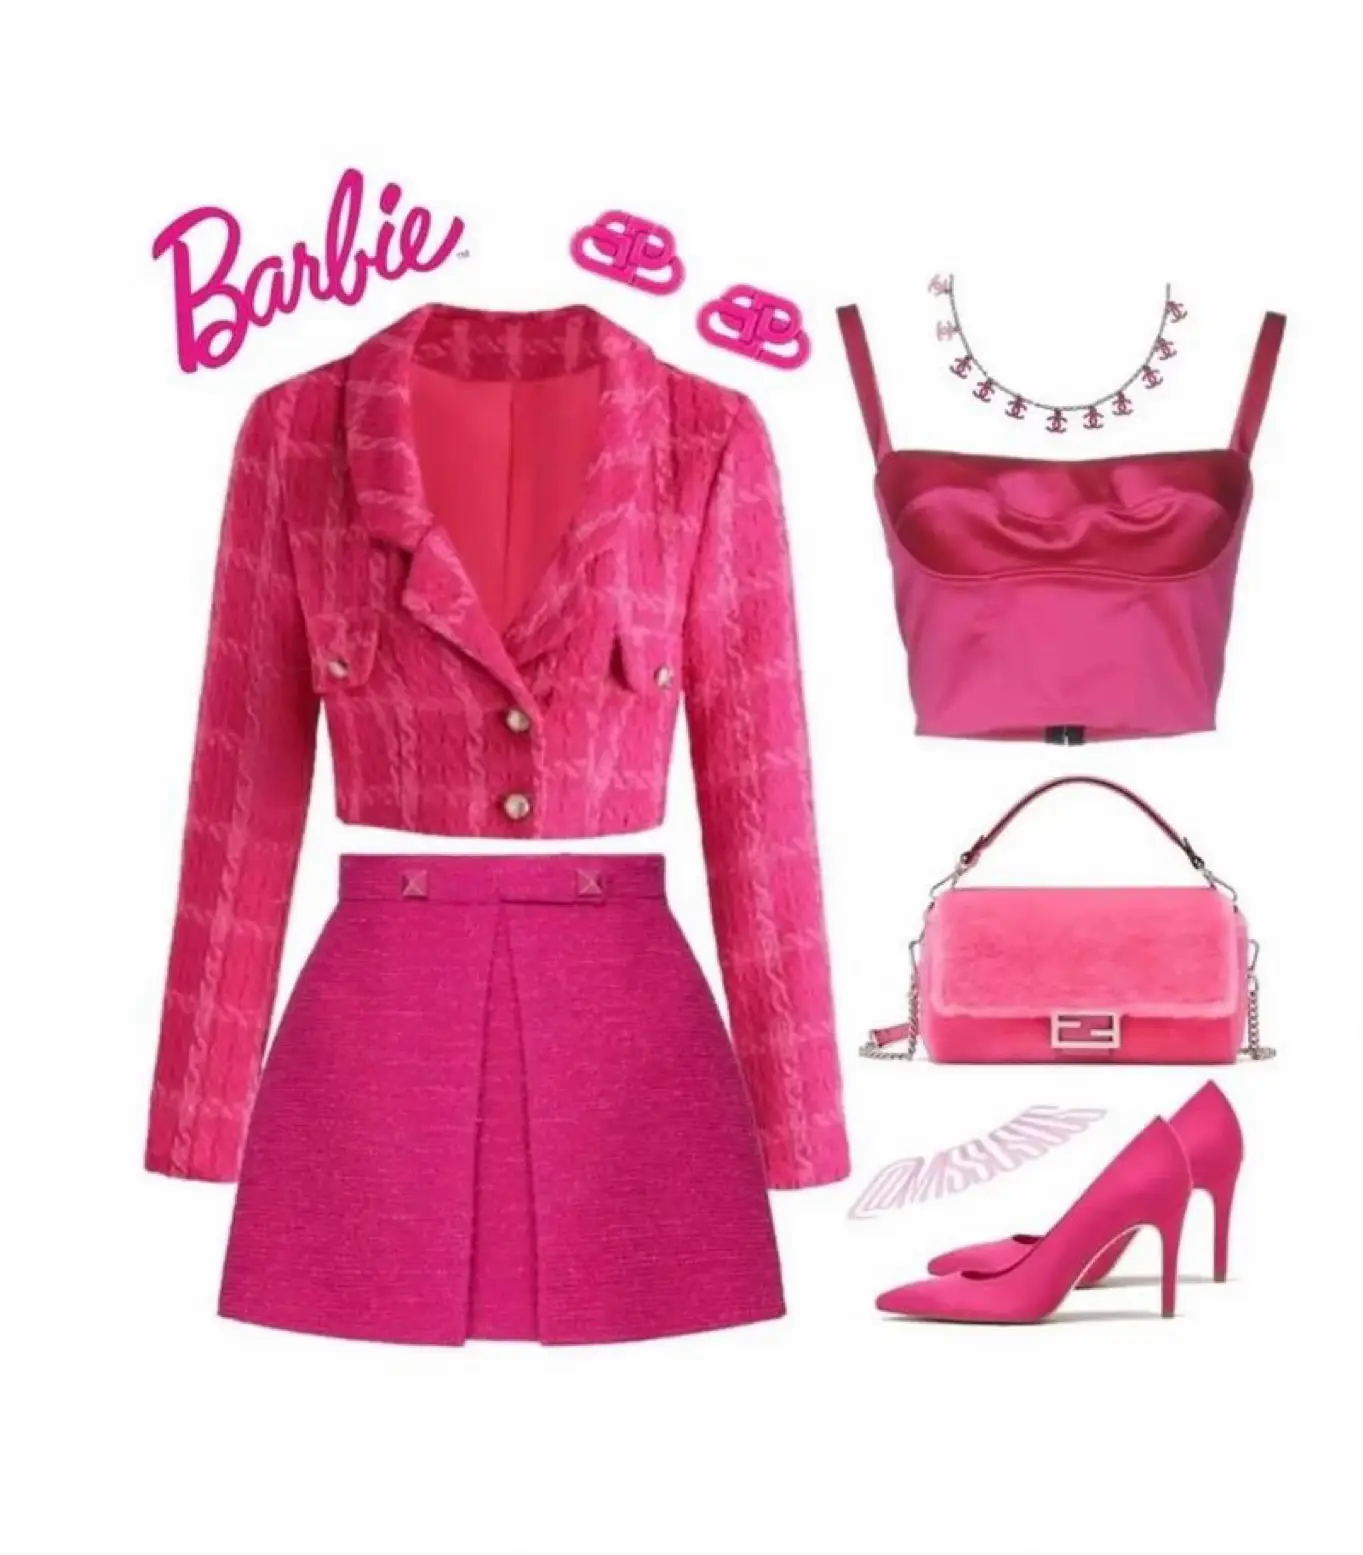 Iconic Pink Barbie Outfit for Adults - Lizzie in Lace